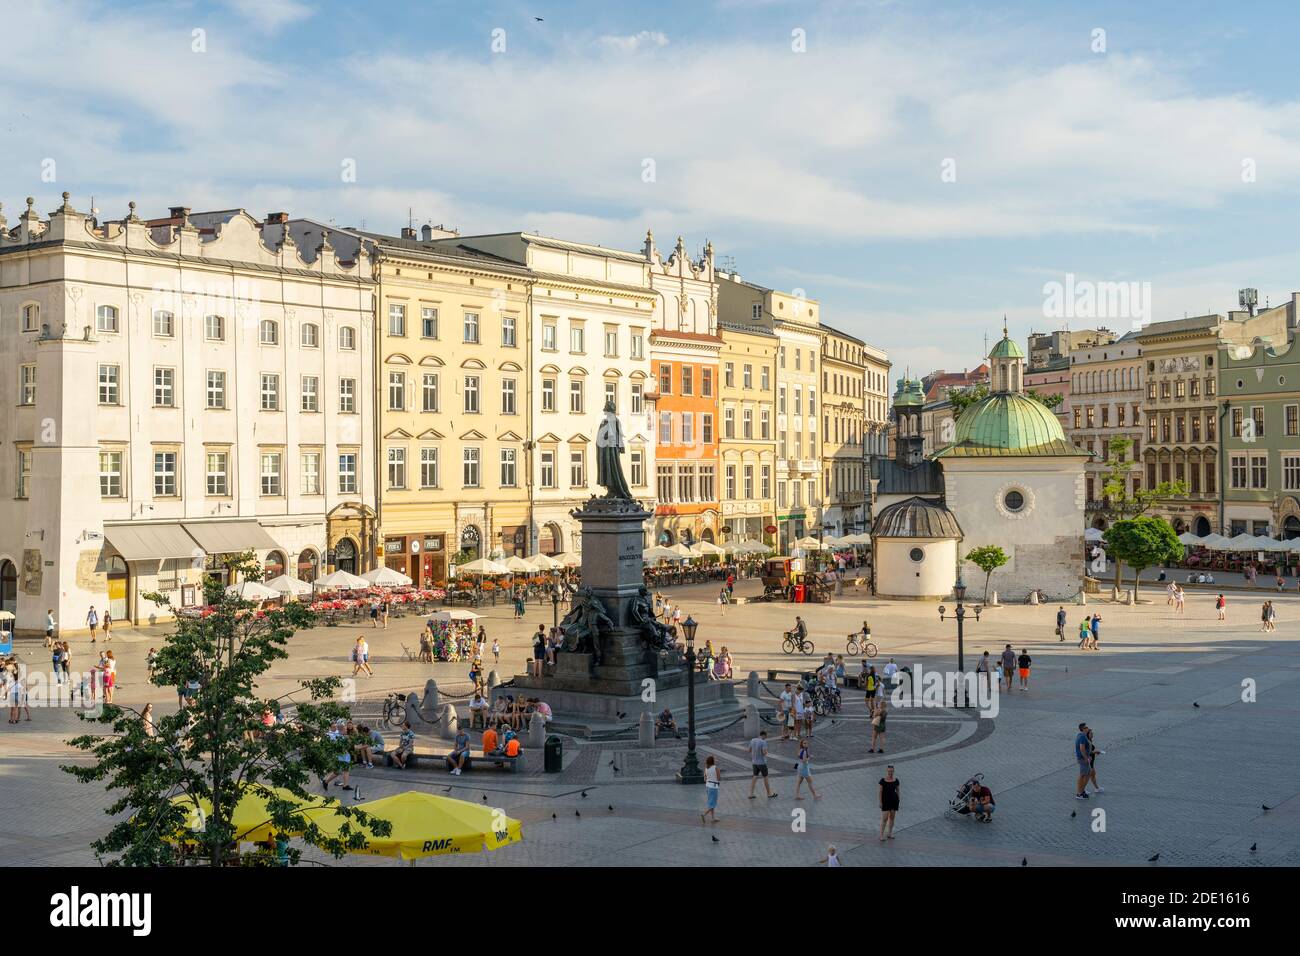 Elevated view of The Old Town Square and Adam Mickiewicz Monument, UNESCO World Heritage Site, Krakow, Poland, Europe Stock Photo